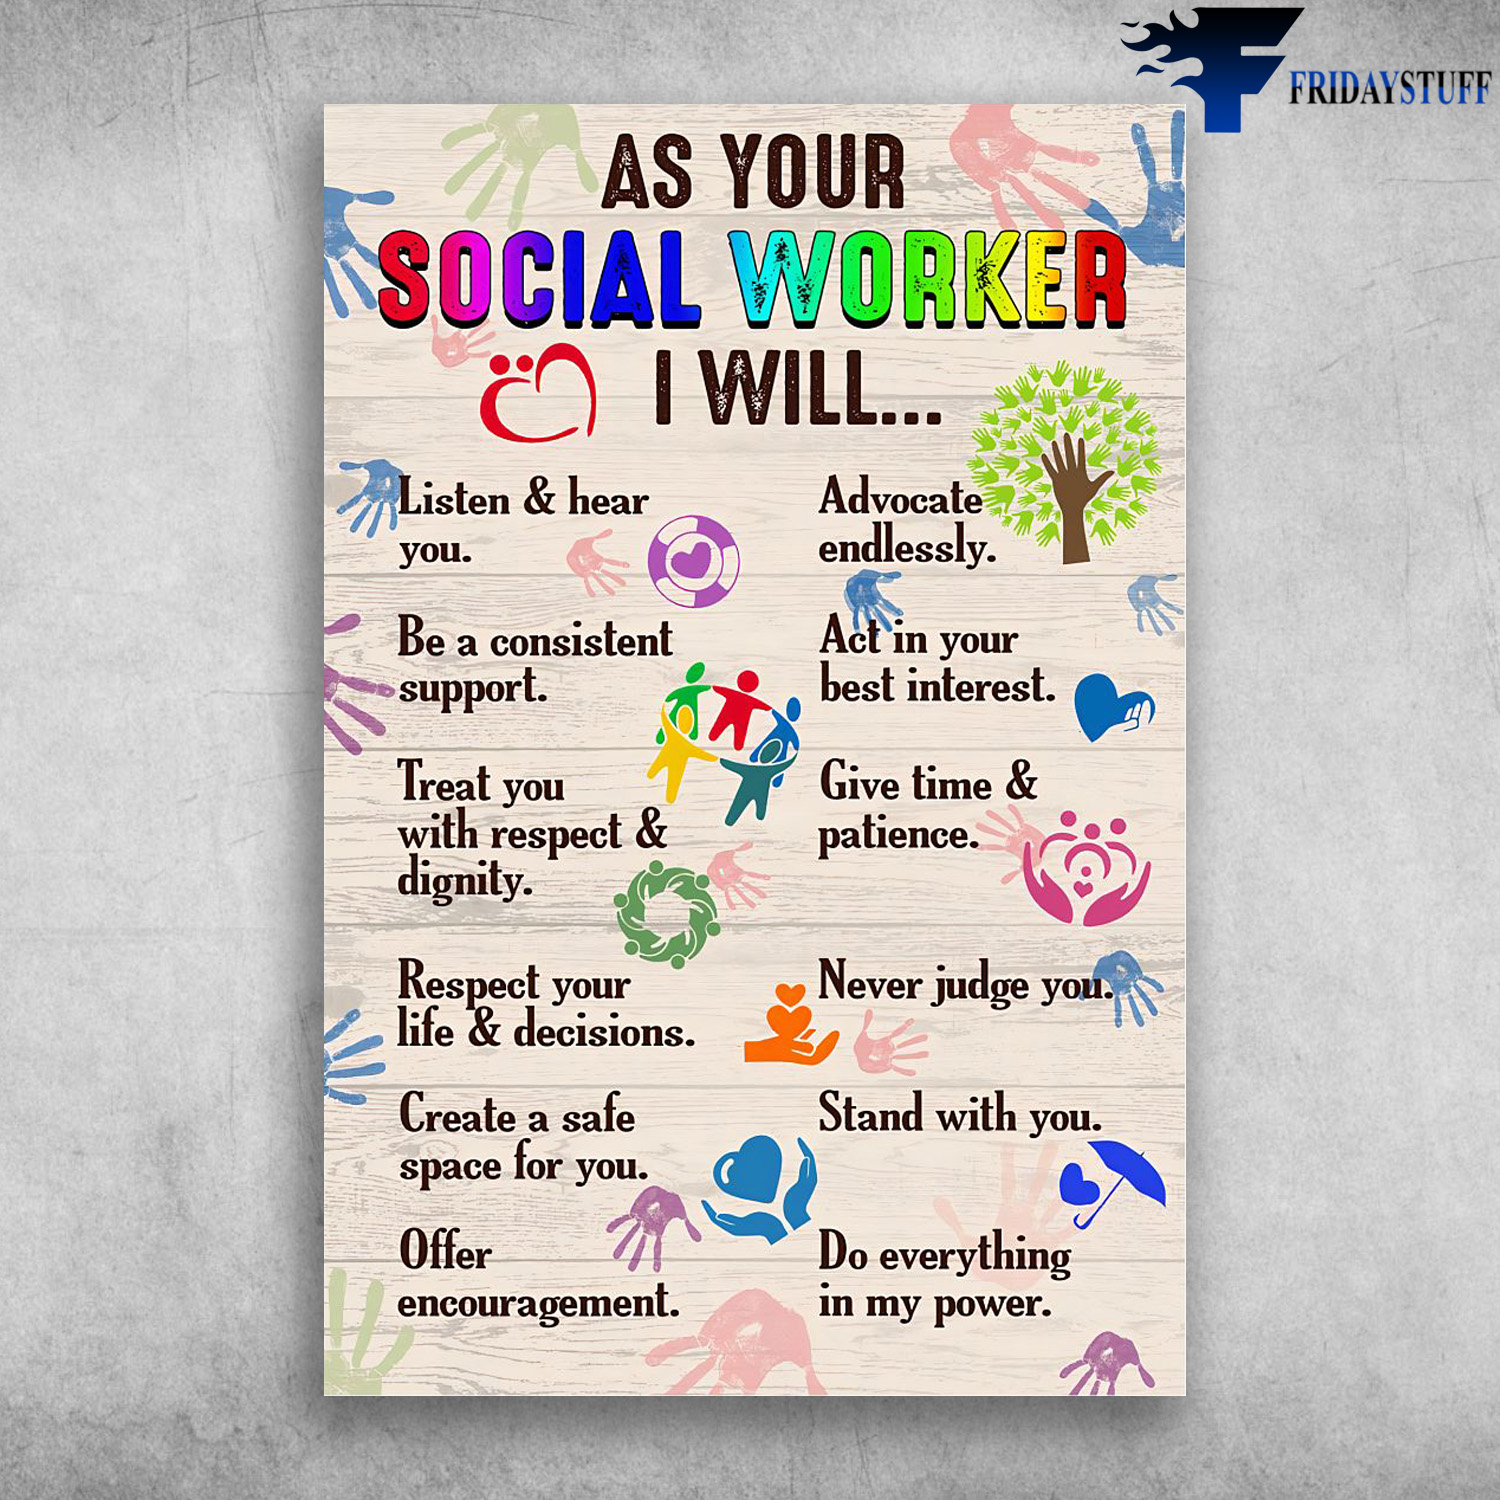 Social Worker - As Your Social Worker, I Will Listen And Hear You, Advocate Andlessly, Be A Consistent Support, Act In Your Best Interest, Trear You With Respect And Dignity, Give Time And Patience, Respect Your Life And Decisions